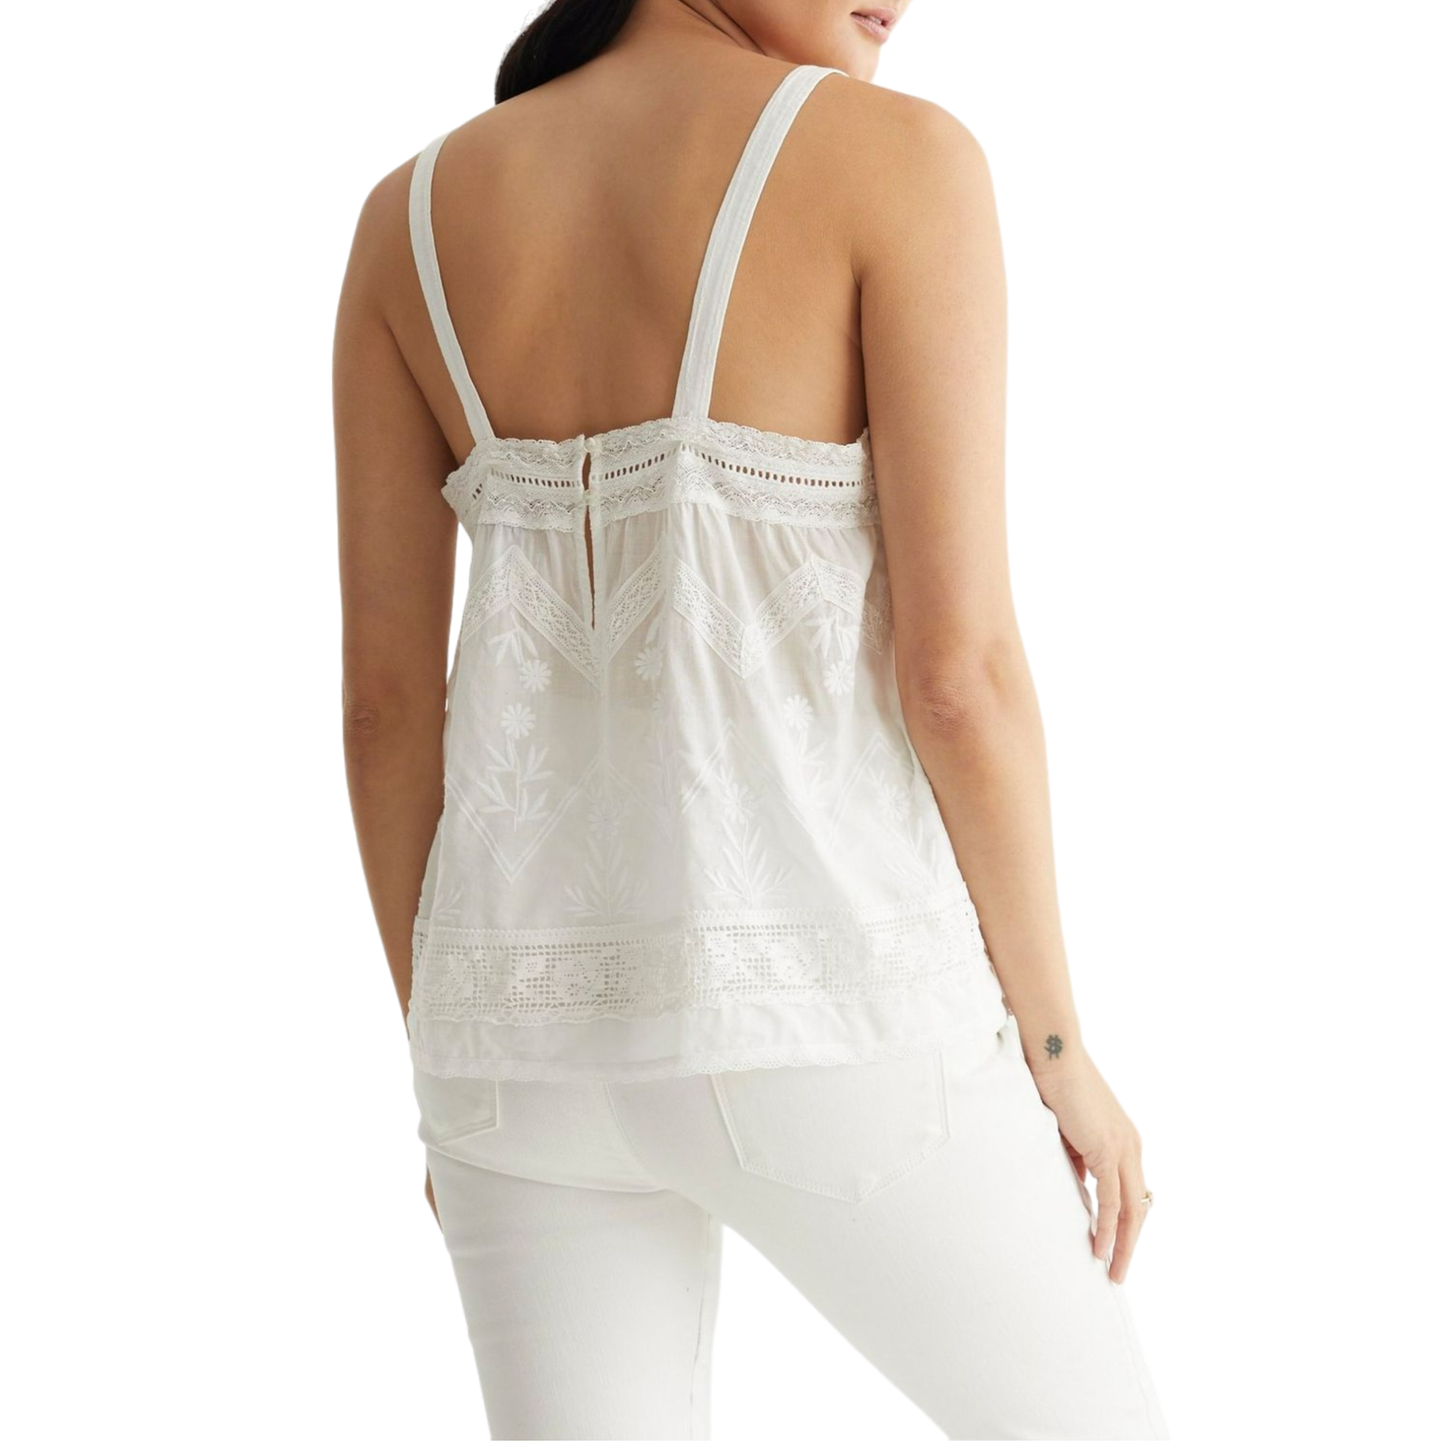 Lucky Brand Women's Embroidery Lace Trim Cotton Camisole Top